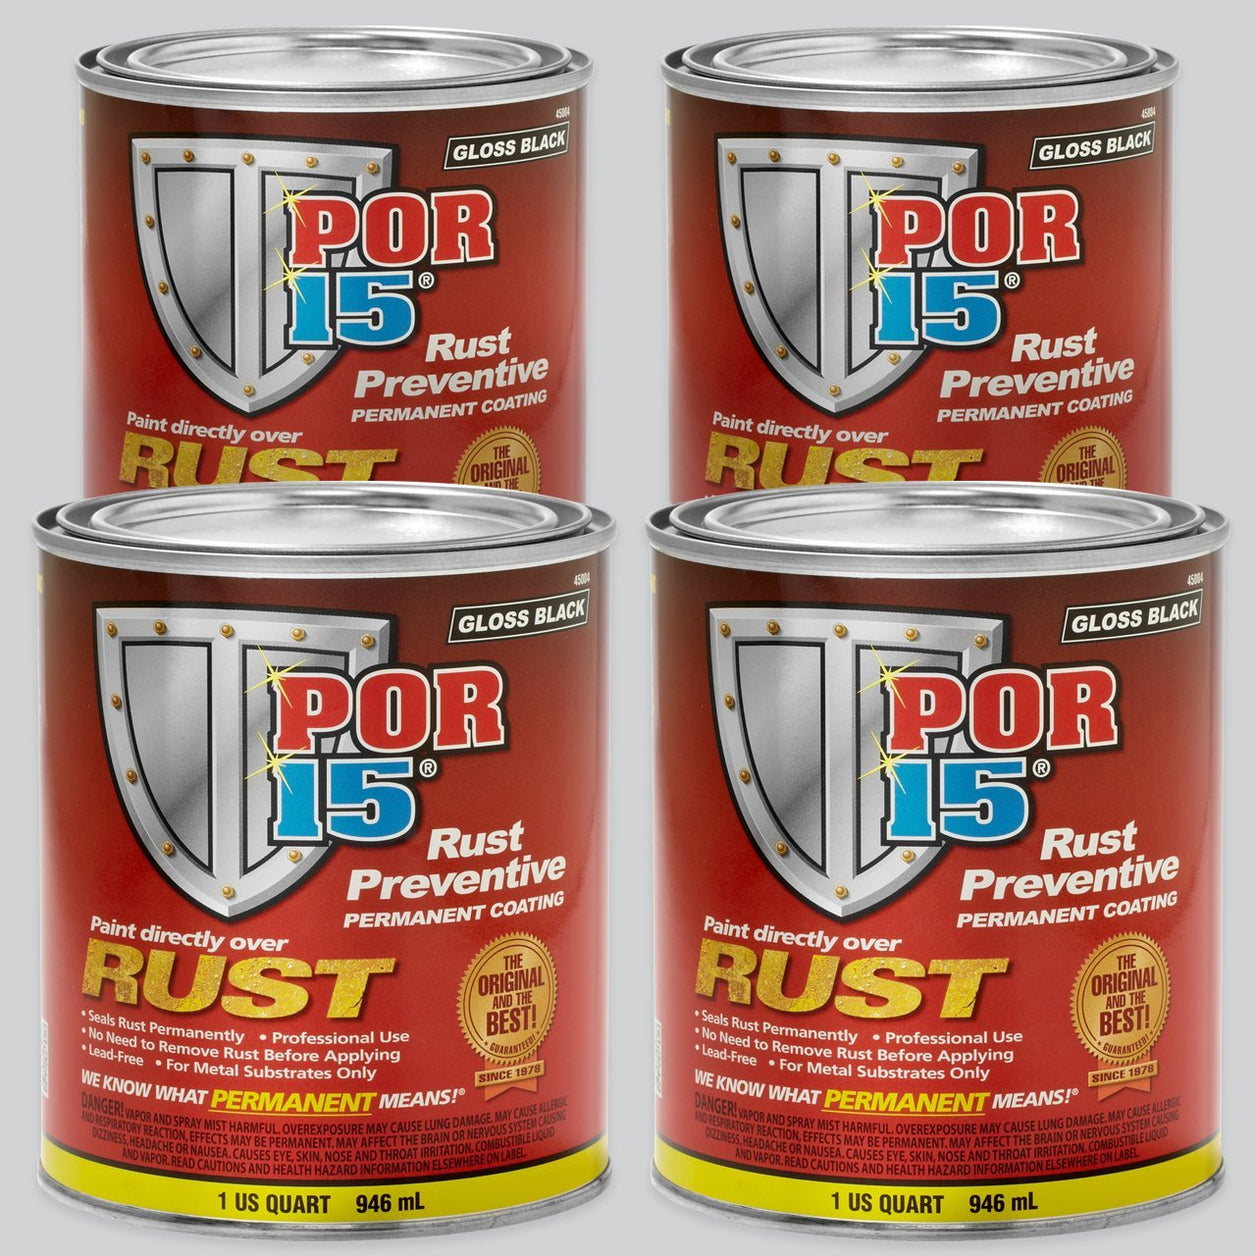 POR-15, Inc. - Got tough rust problems? POR-15 Rubberized Under Coating is  a flexible, paintable, textured black coating that protects against  moisture, salt, chemicals, dust, heat, and cold. This paint for metal